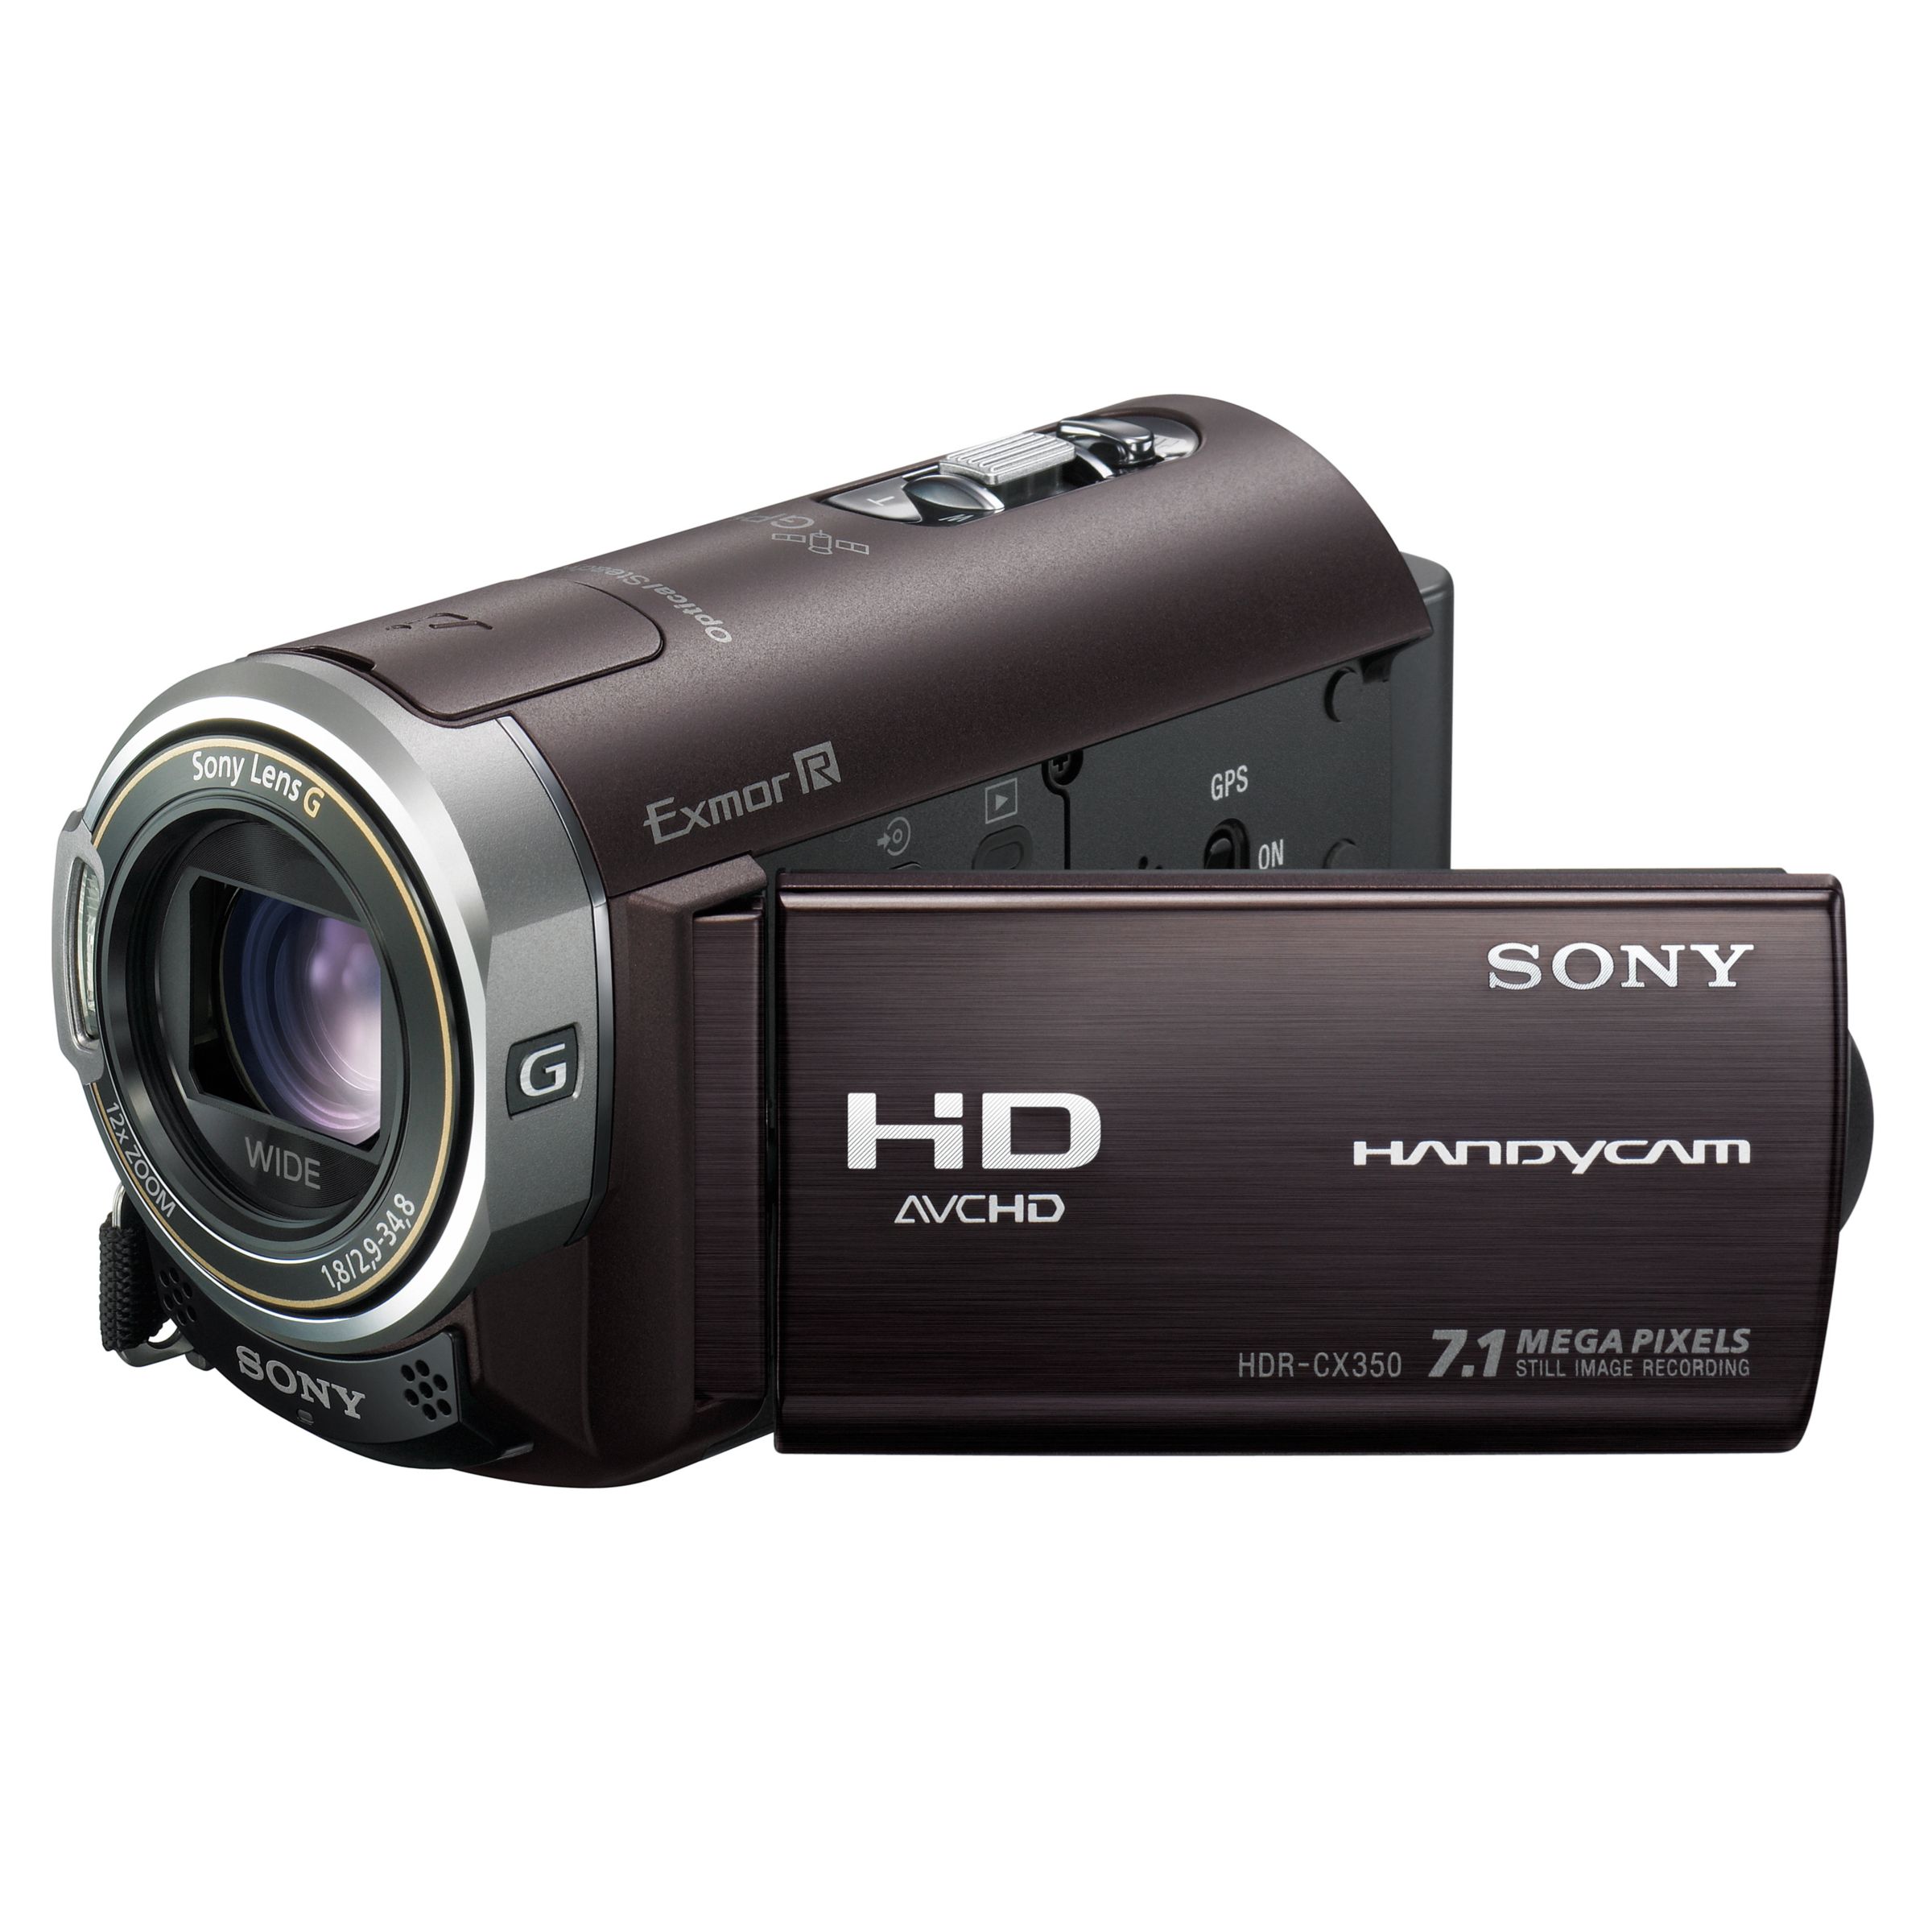 Sony HDR-CX350VE High Definition 32GB Flash Memory/Memory Stick Camcorder, Purple at John Lewis